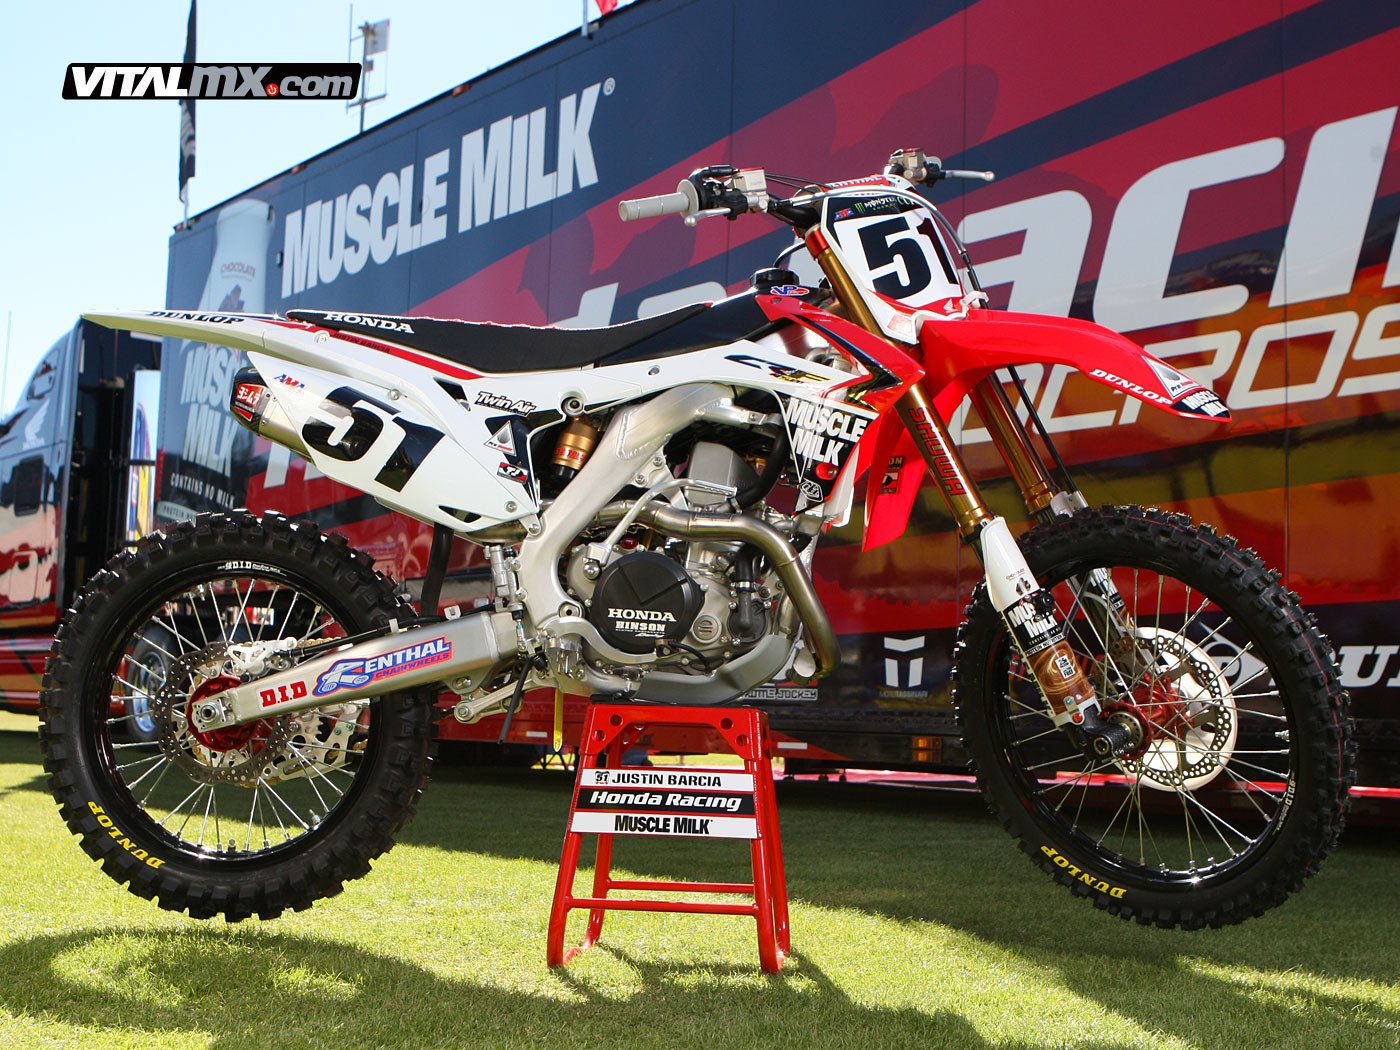 Factory Honda - Moto-Related - Motocross Forums / Message Boards ...